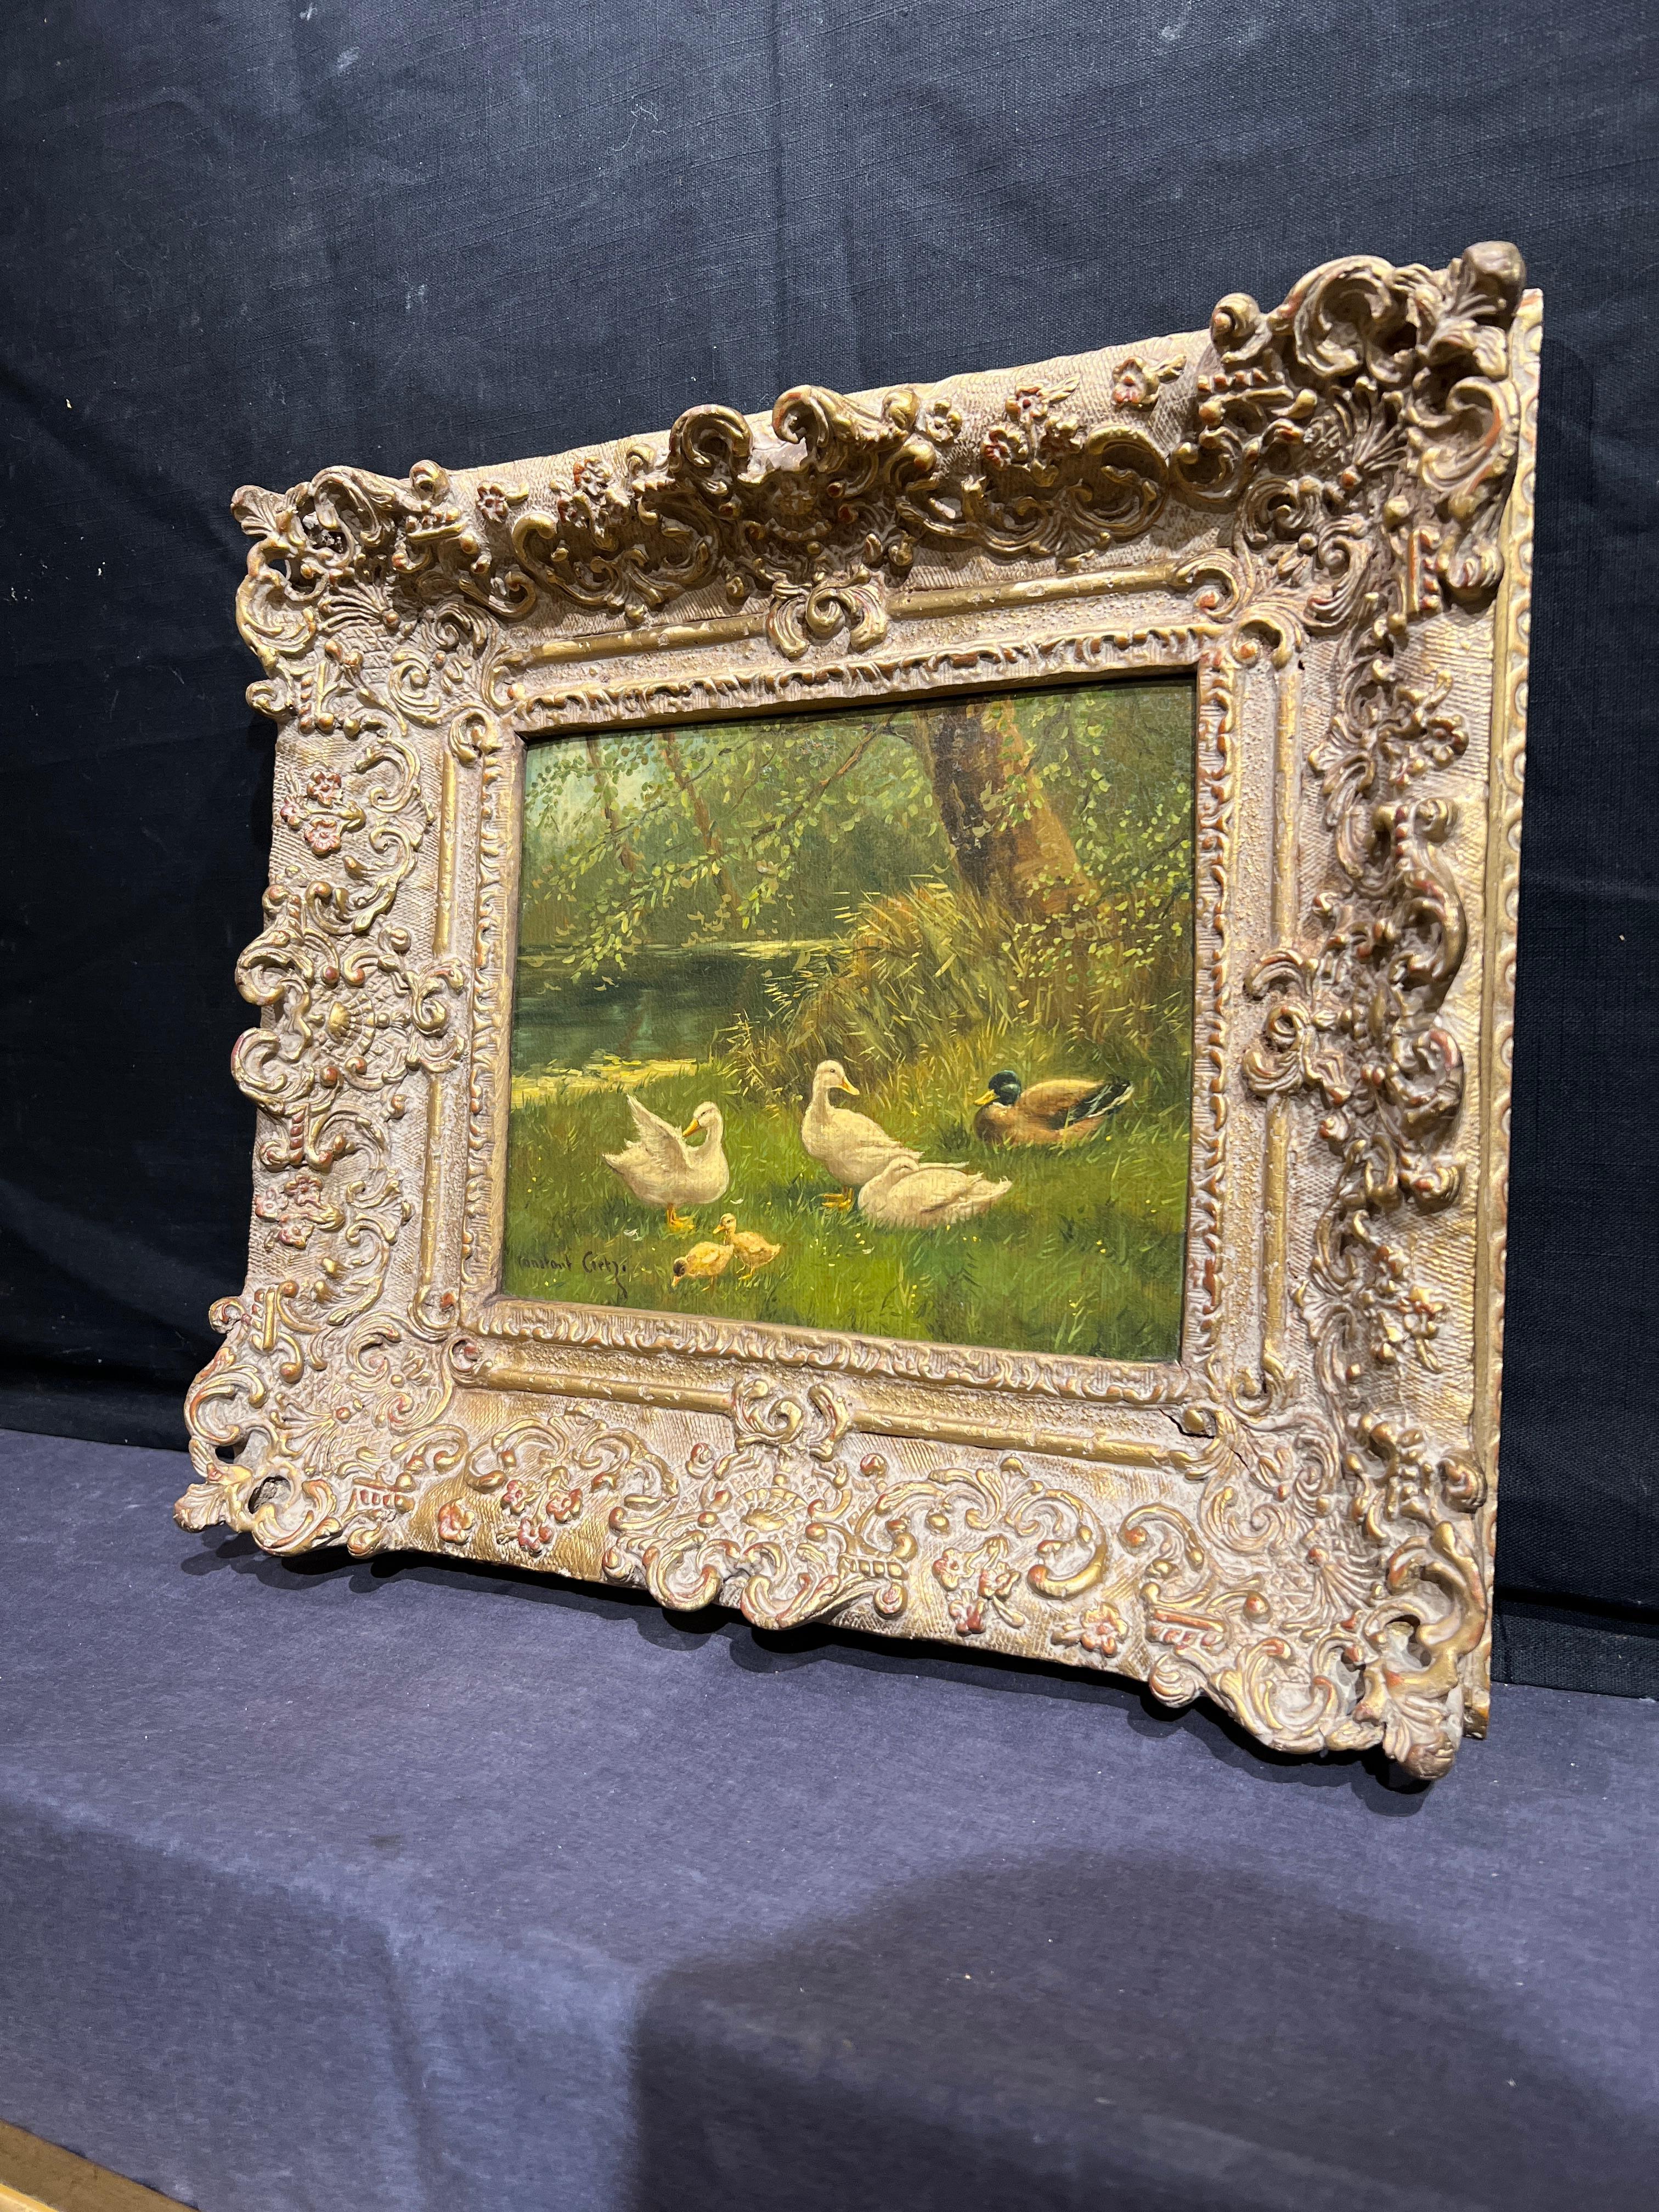 Duck Family
By. David Adolph Constant Artz (Dutch, 1837-1890)
Signed Lower Left
Unframed: 9